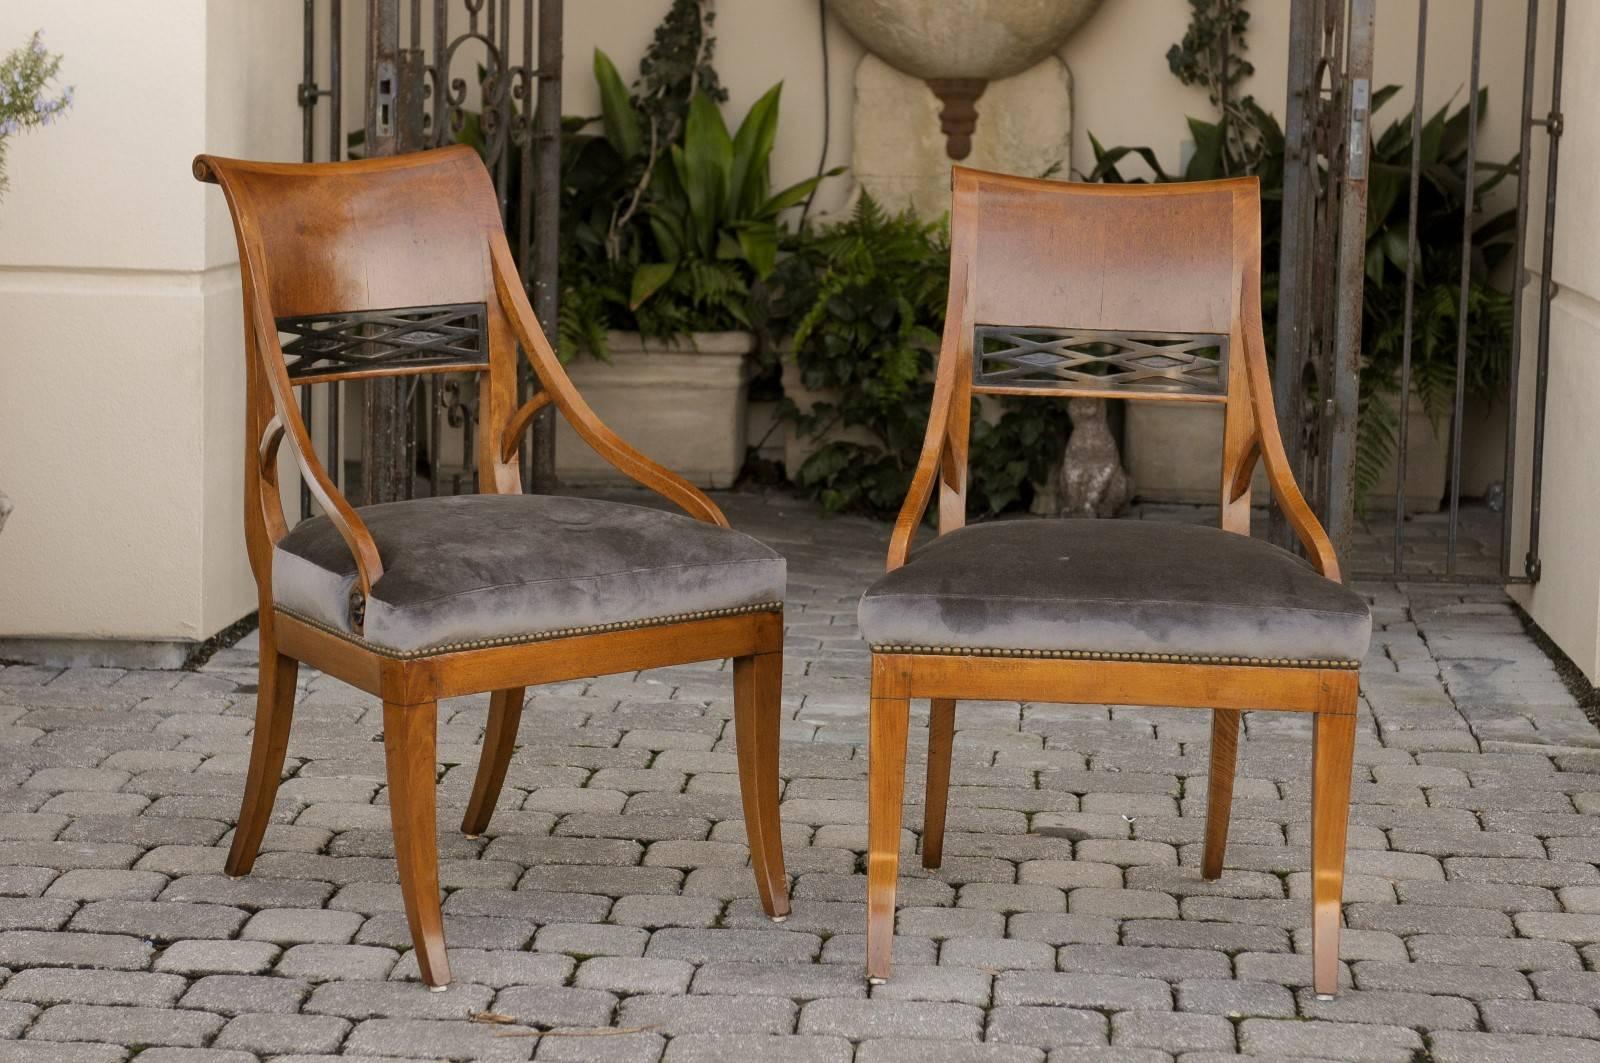 A pair of Austrian, 19th century Biedermeier side chairs. This pair of Biedermeier birch side chairs from circa 1840 features a scrolled back with partially pierced ebonized diamond patterns. The chairs are raised on four saber legs, typical of the